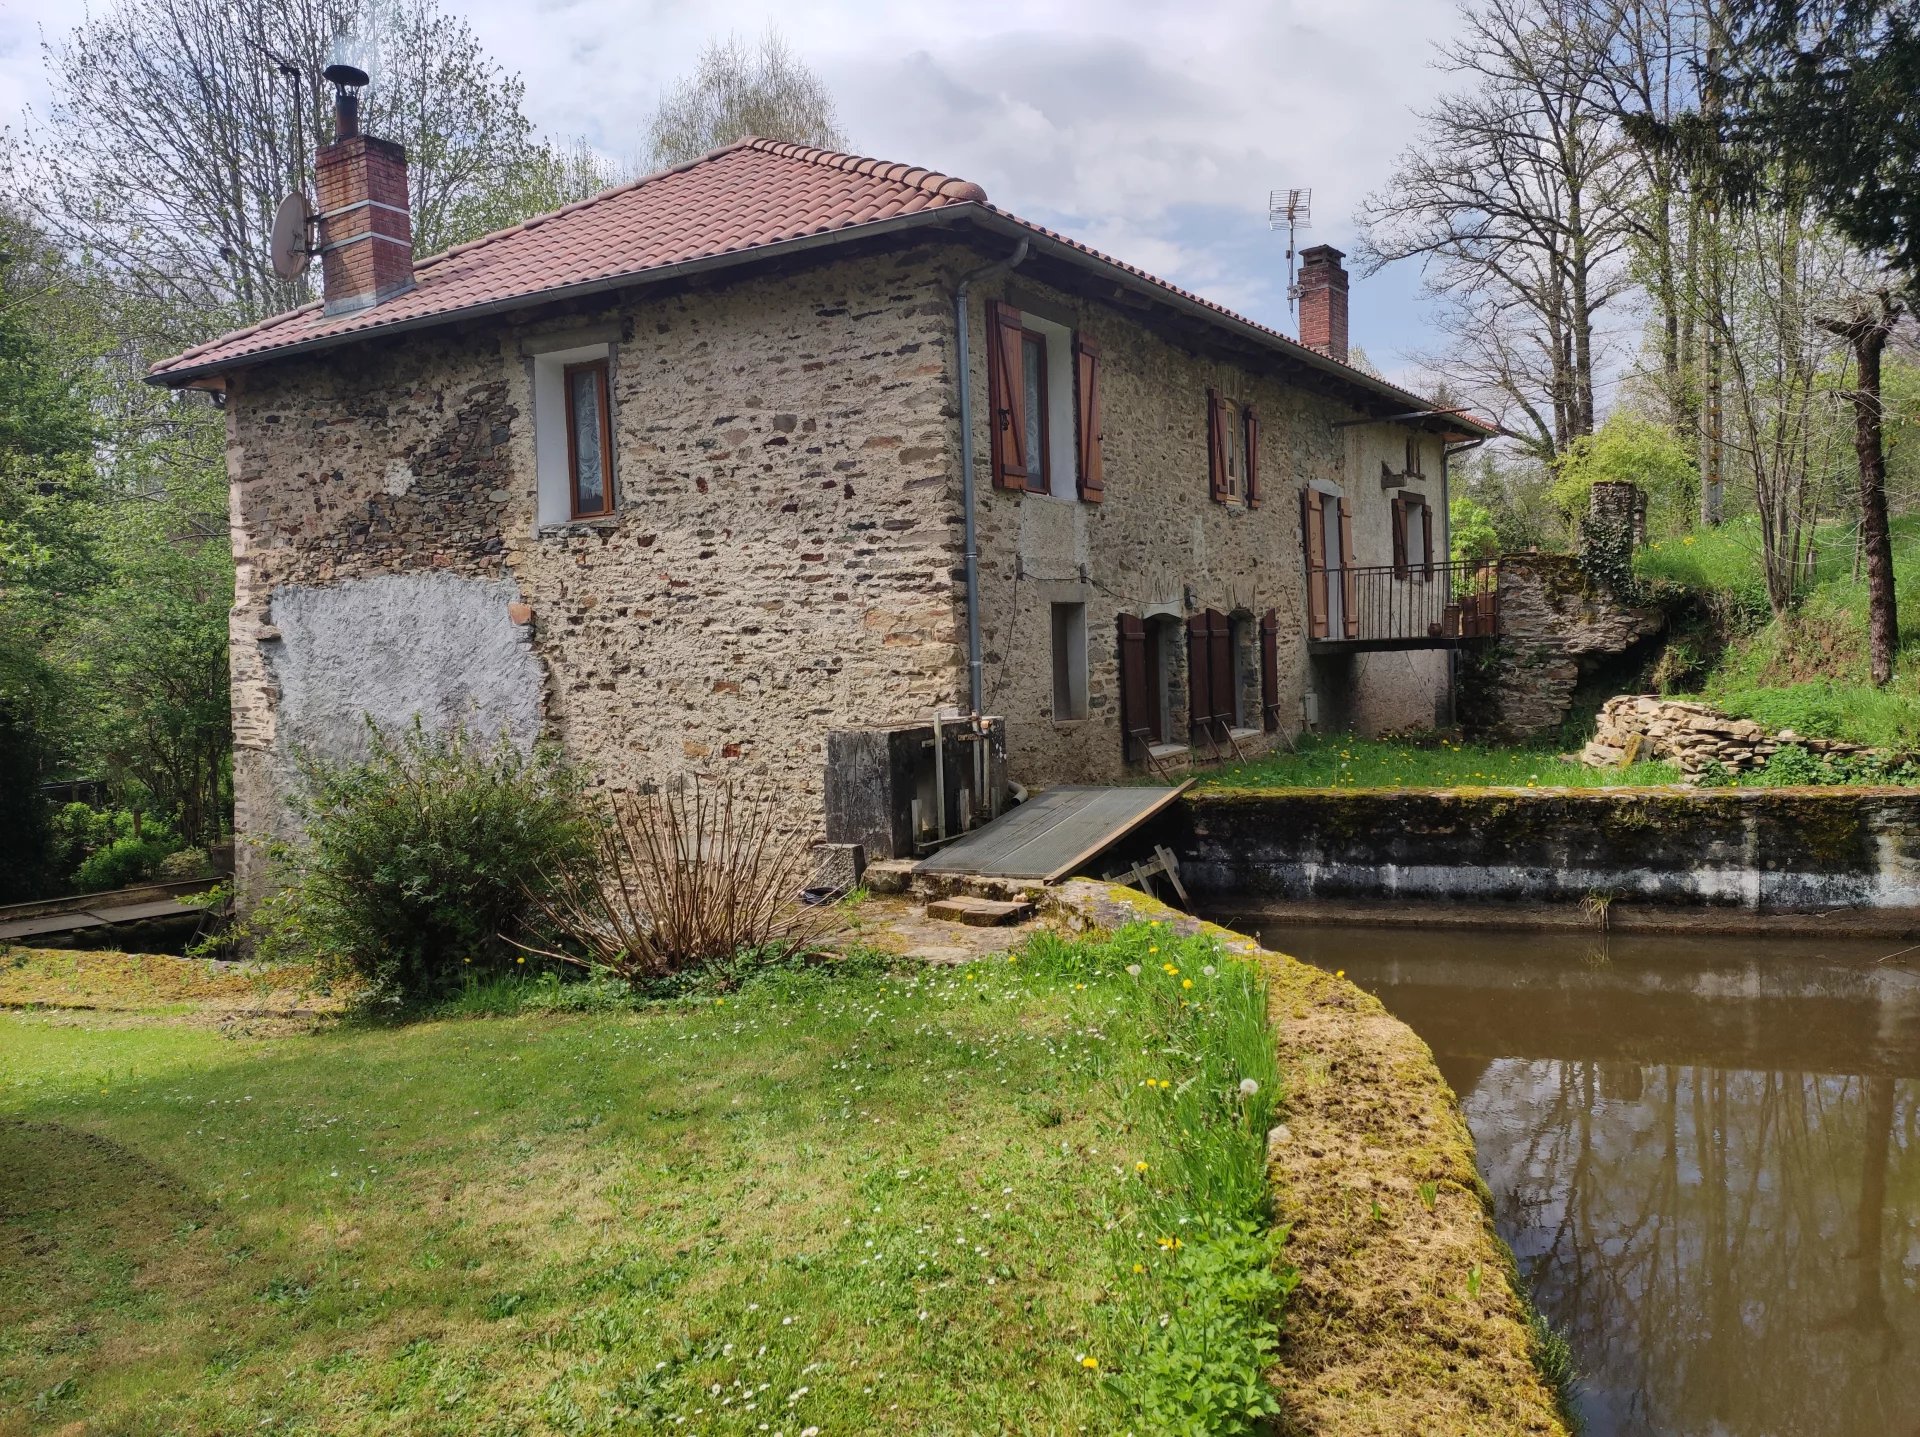 Lovely mill in the Périgord Limousin national park